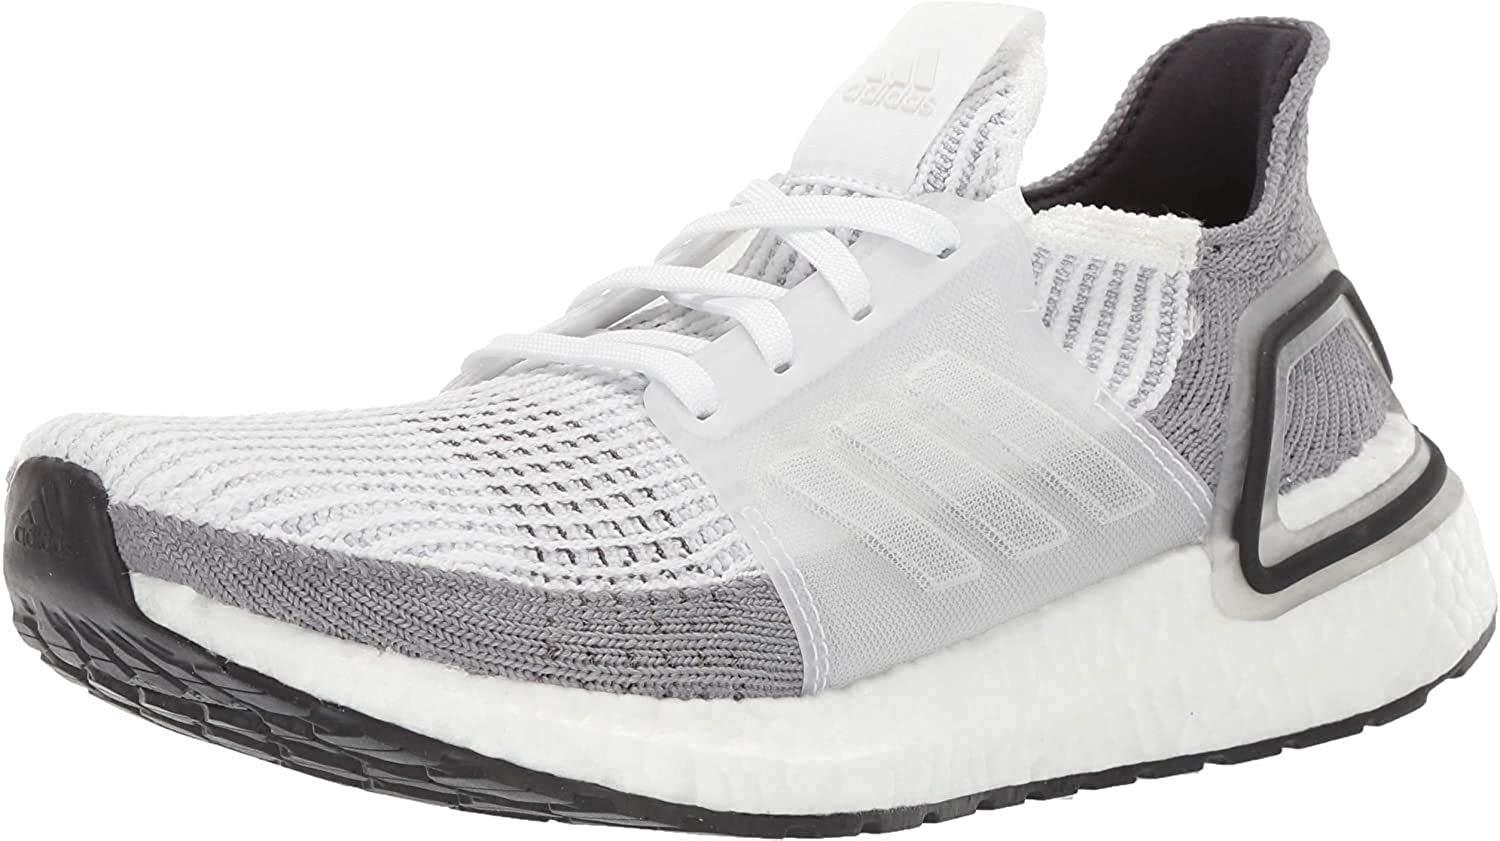 adidas Synthetic Ultraboost 19 in White/Crystal White/Grey (White) | Lyst